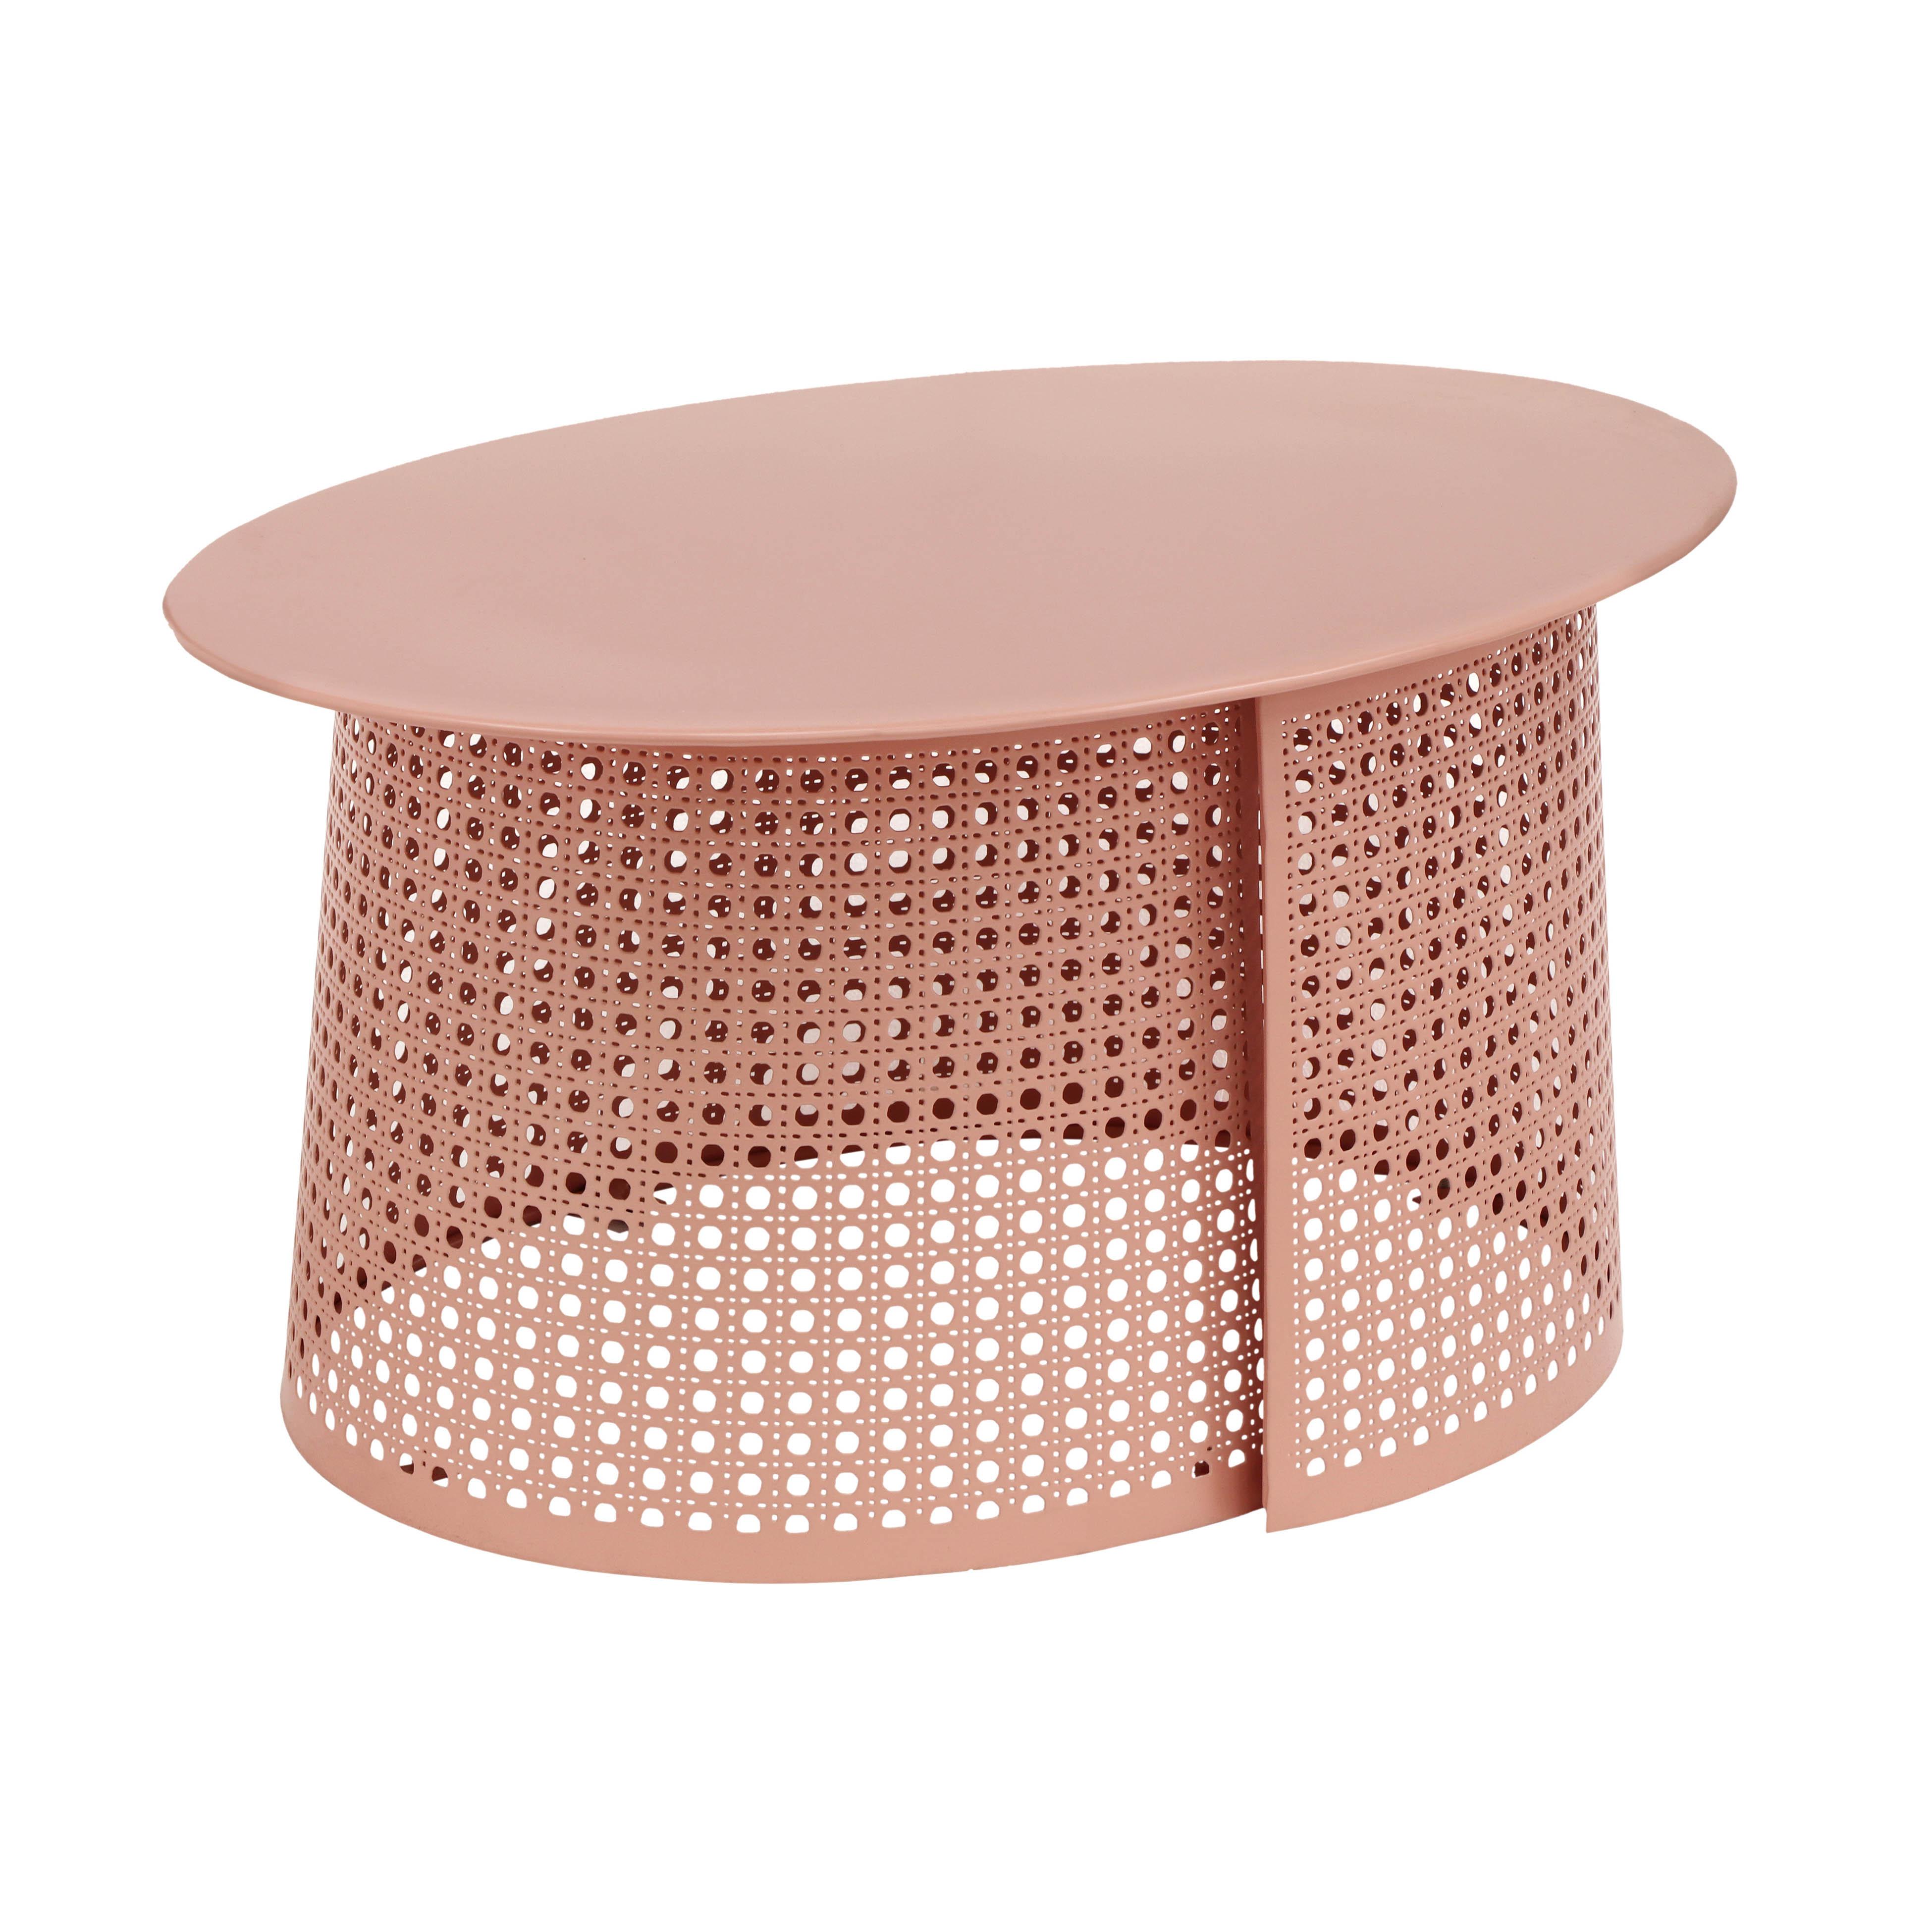 Tov Furniture Coffee Tables - Pesky Coral Pink Coffee Table